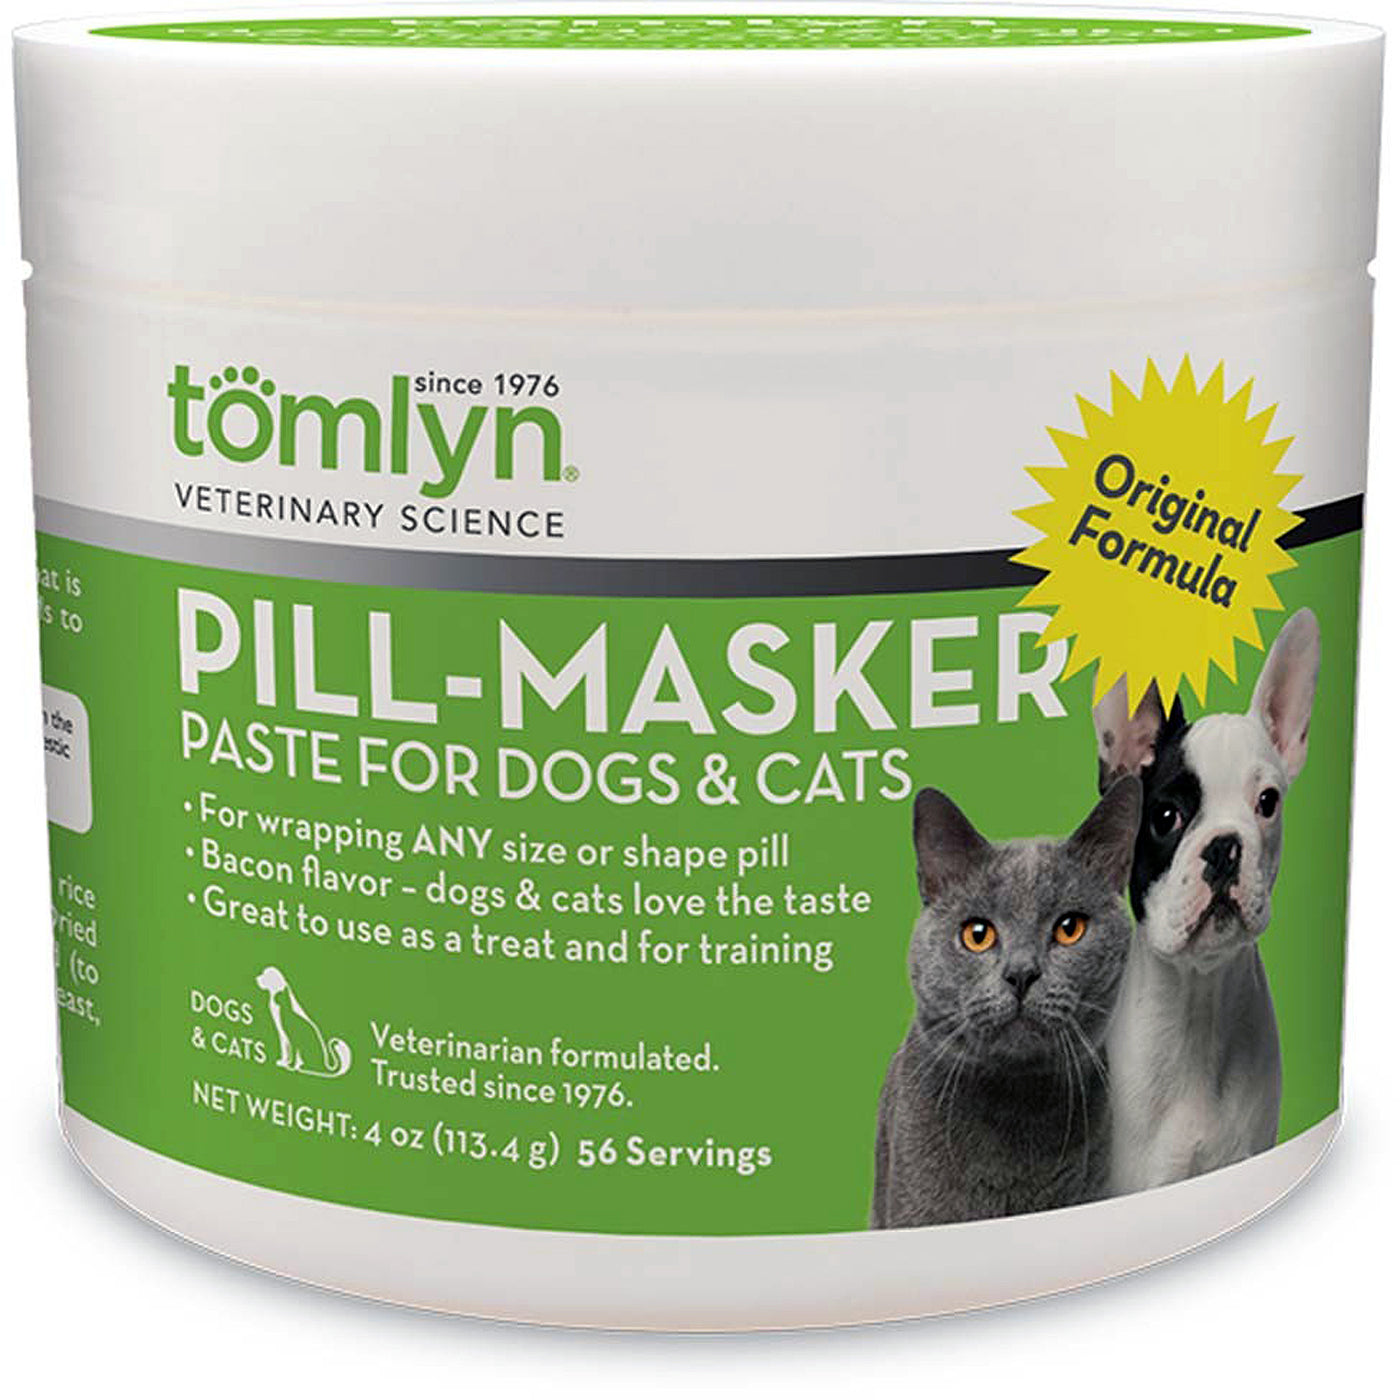 Tomlyn Pill-Masker For Dogs and Cats Original Formula 56 Ct, 4 Oz